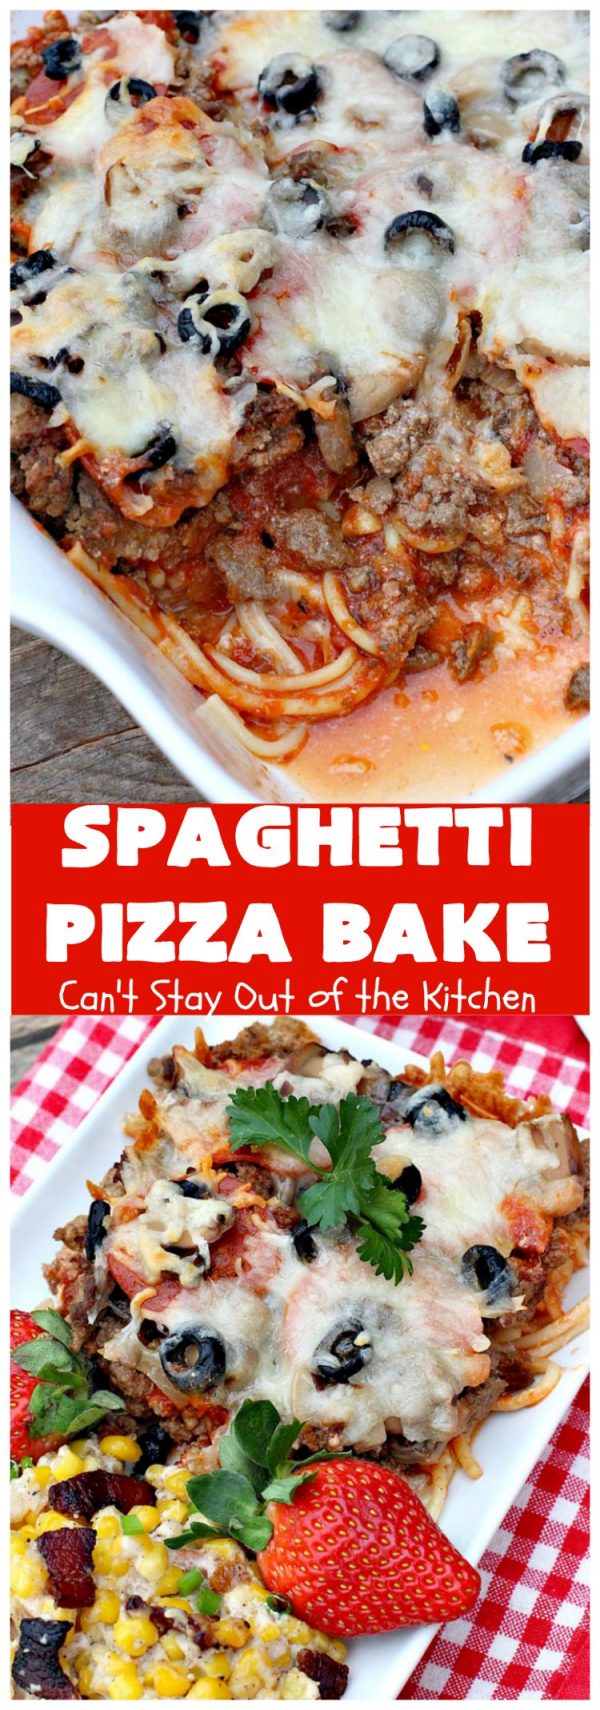 Spaghetti Pizza Bake – Can't Stay Out of the Kitchen